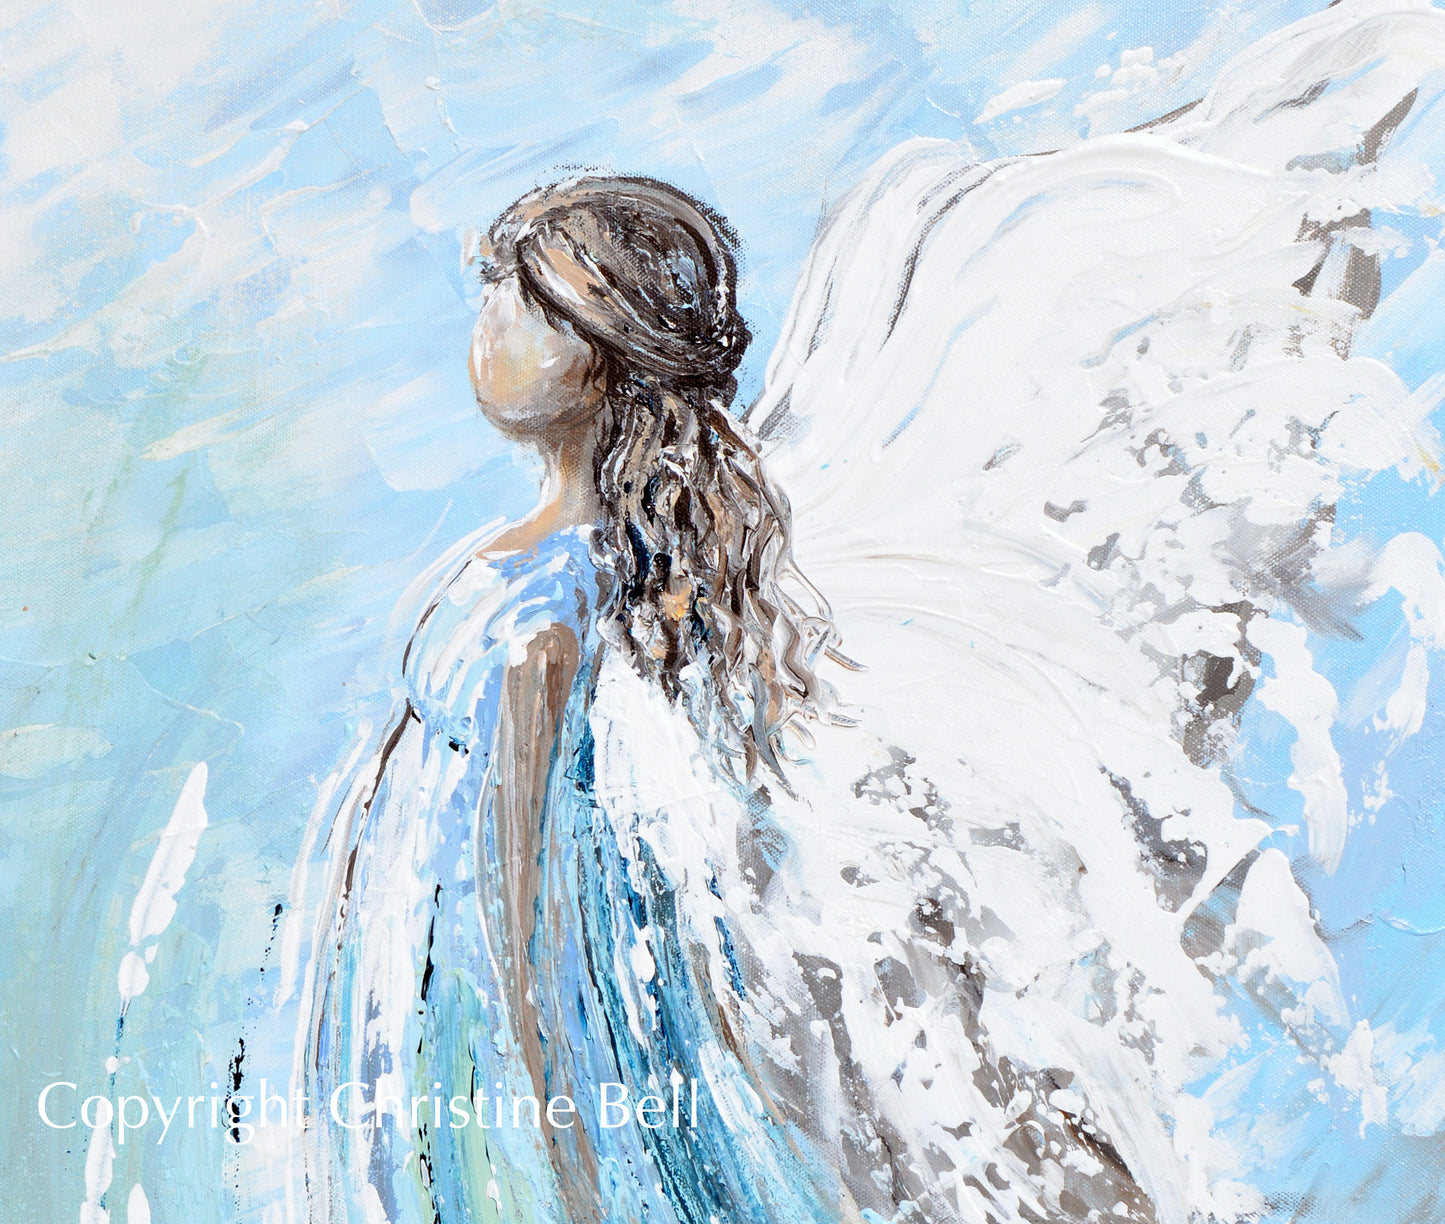 SPECIAL RELEASE GICLEE PRINT "Lifted by Grace" Abstract Angel Painting Modern Guardian Angel Canvas